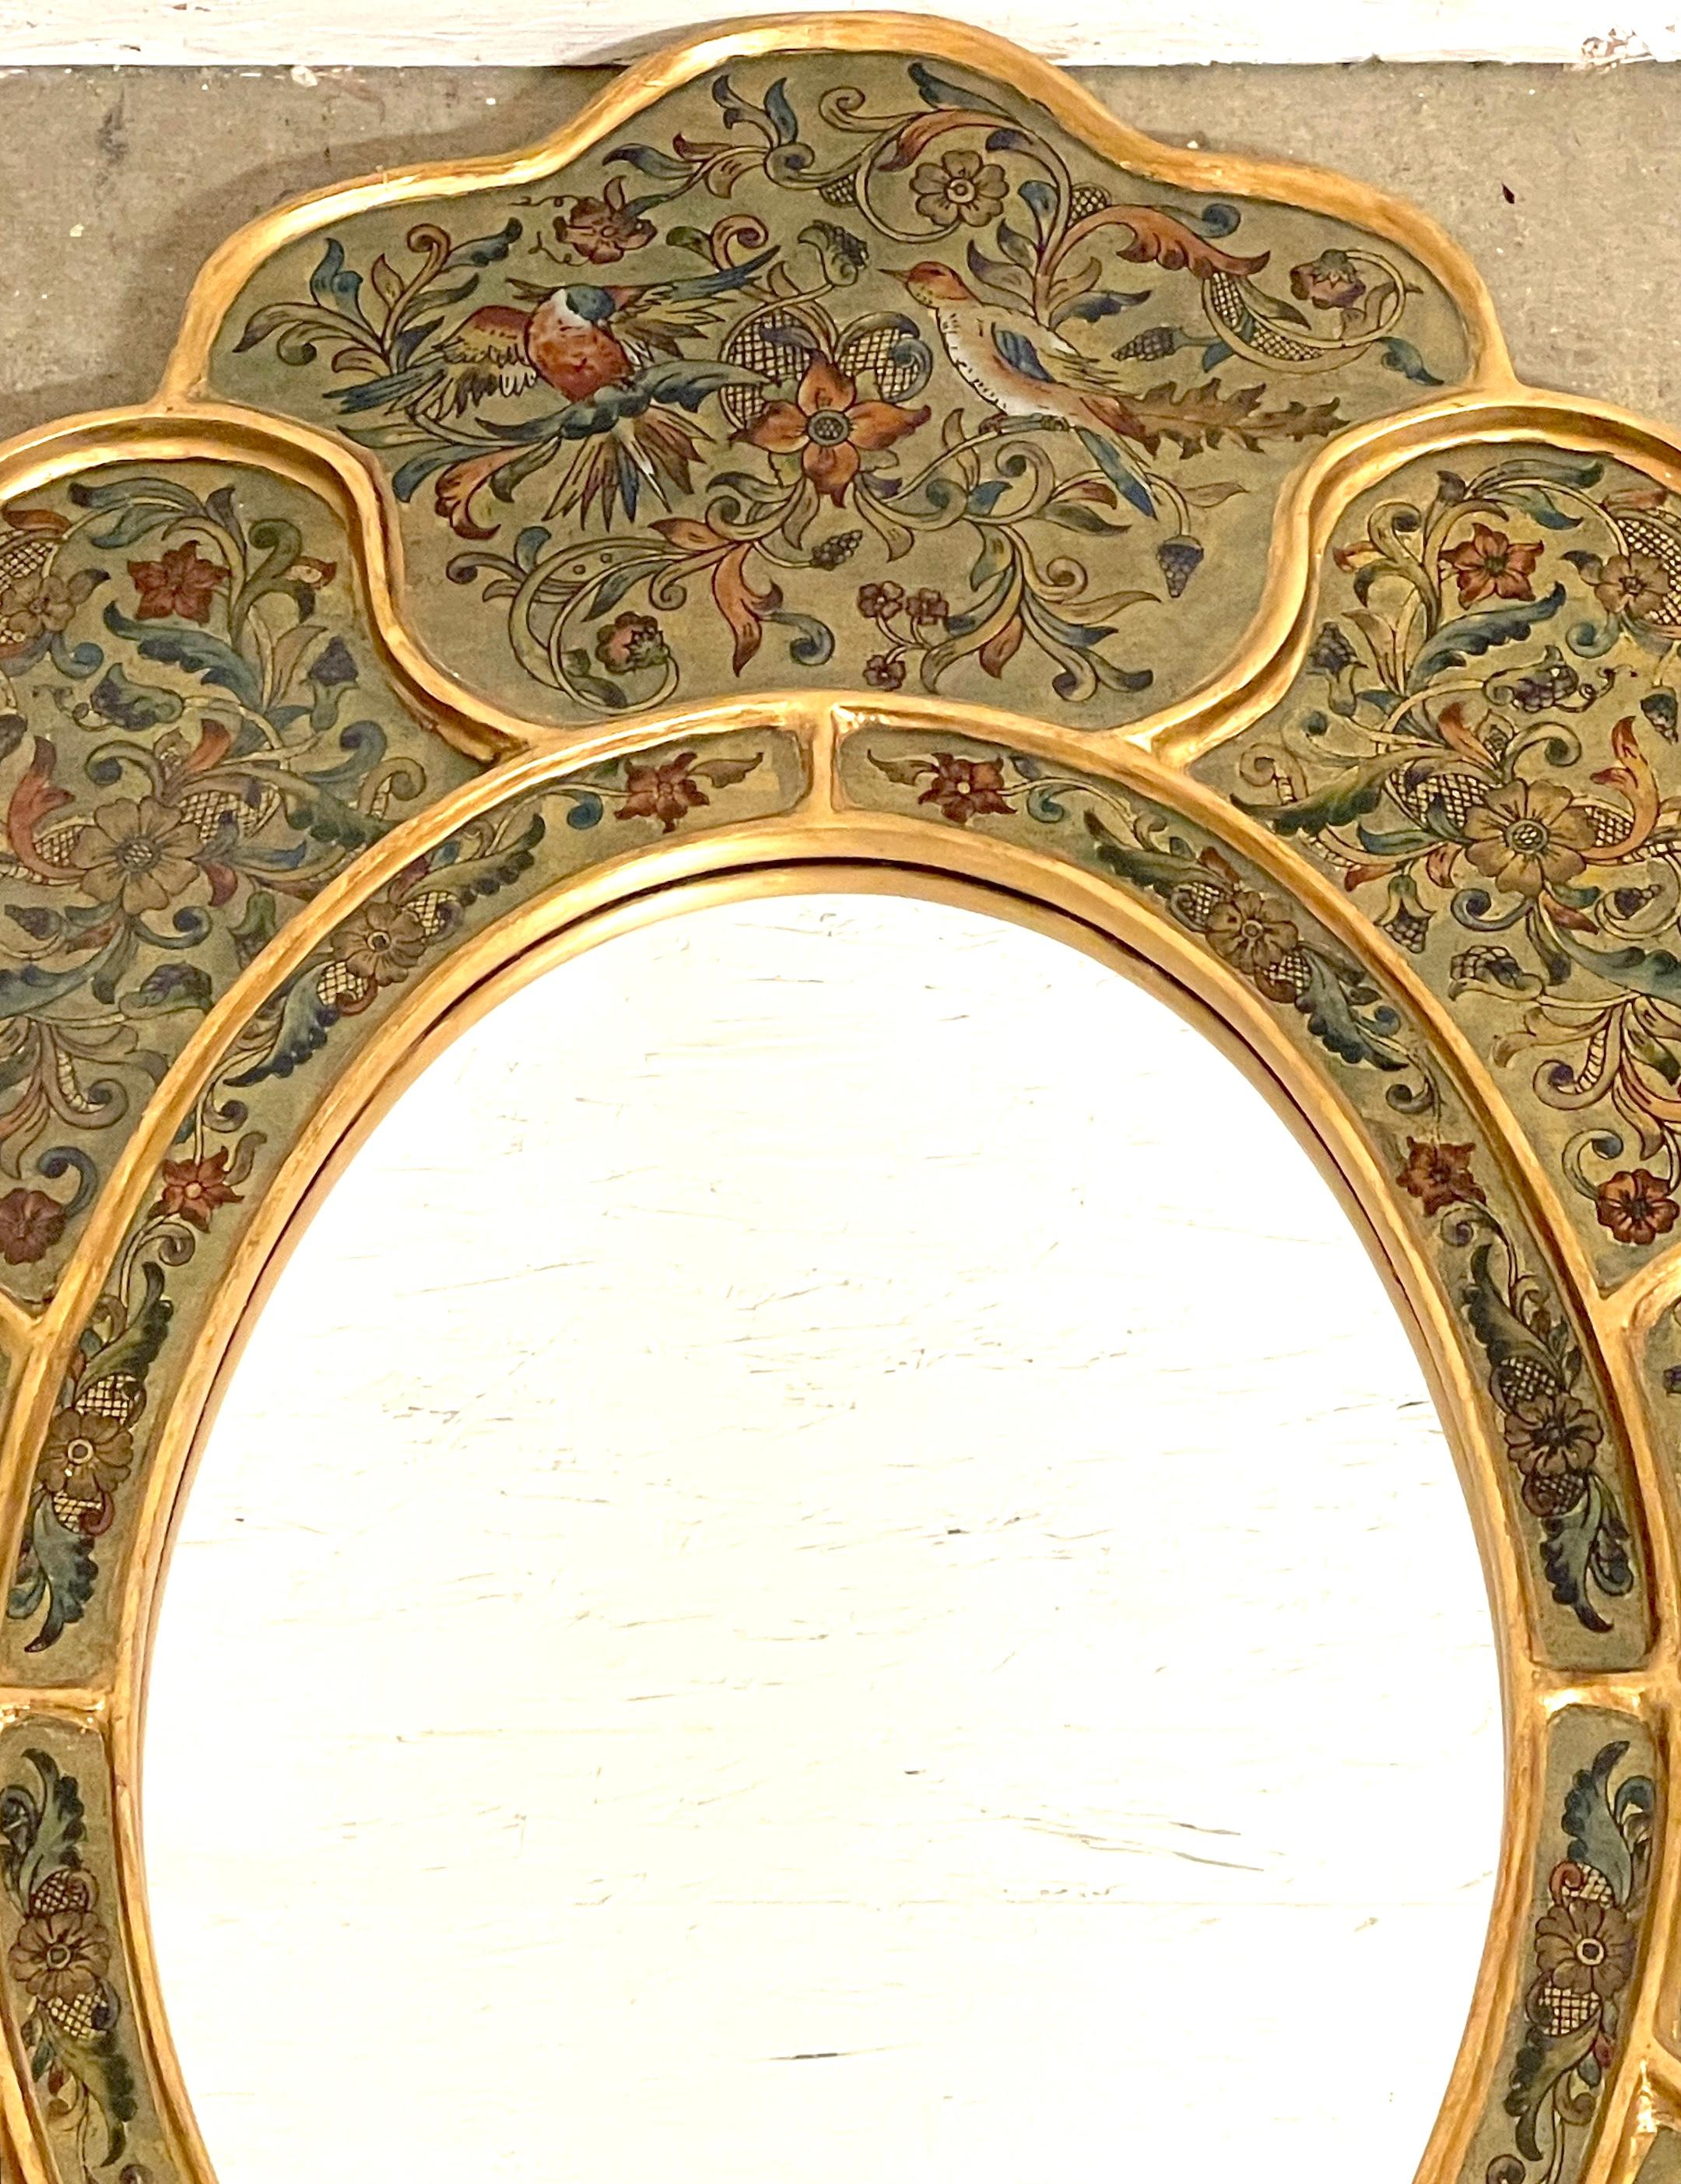 Spanish Colonial Bird & Floral Decorated Gilt Scalloped Verre Églomisé Mirror In Good Condition For Sale In West Palm Beach, FL